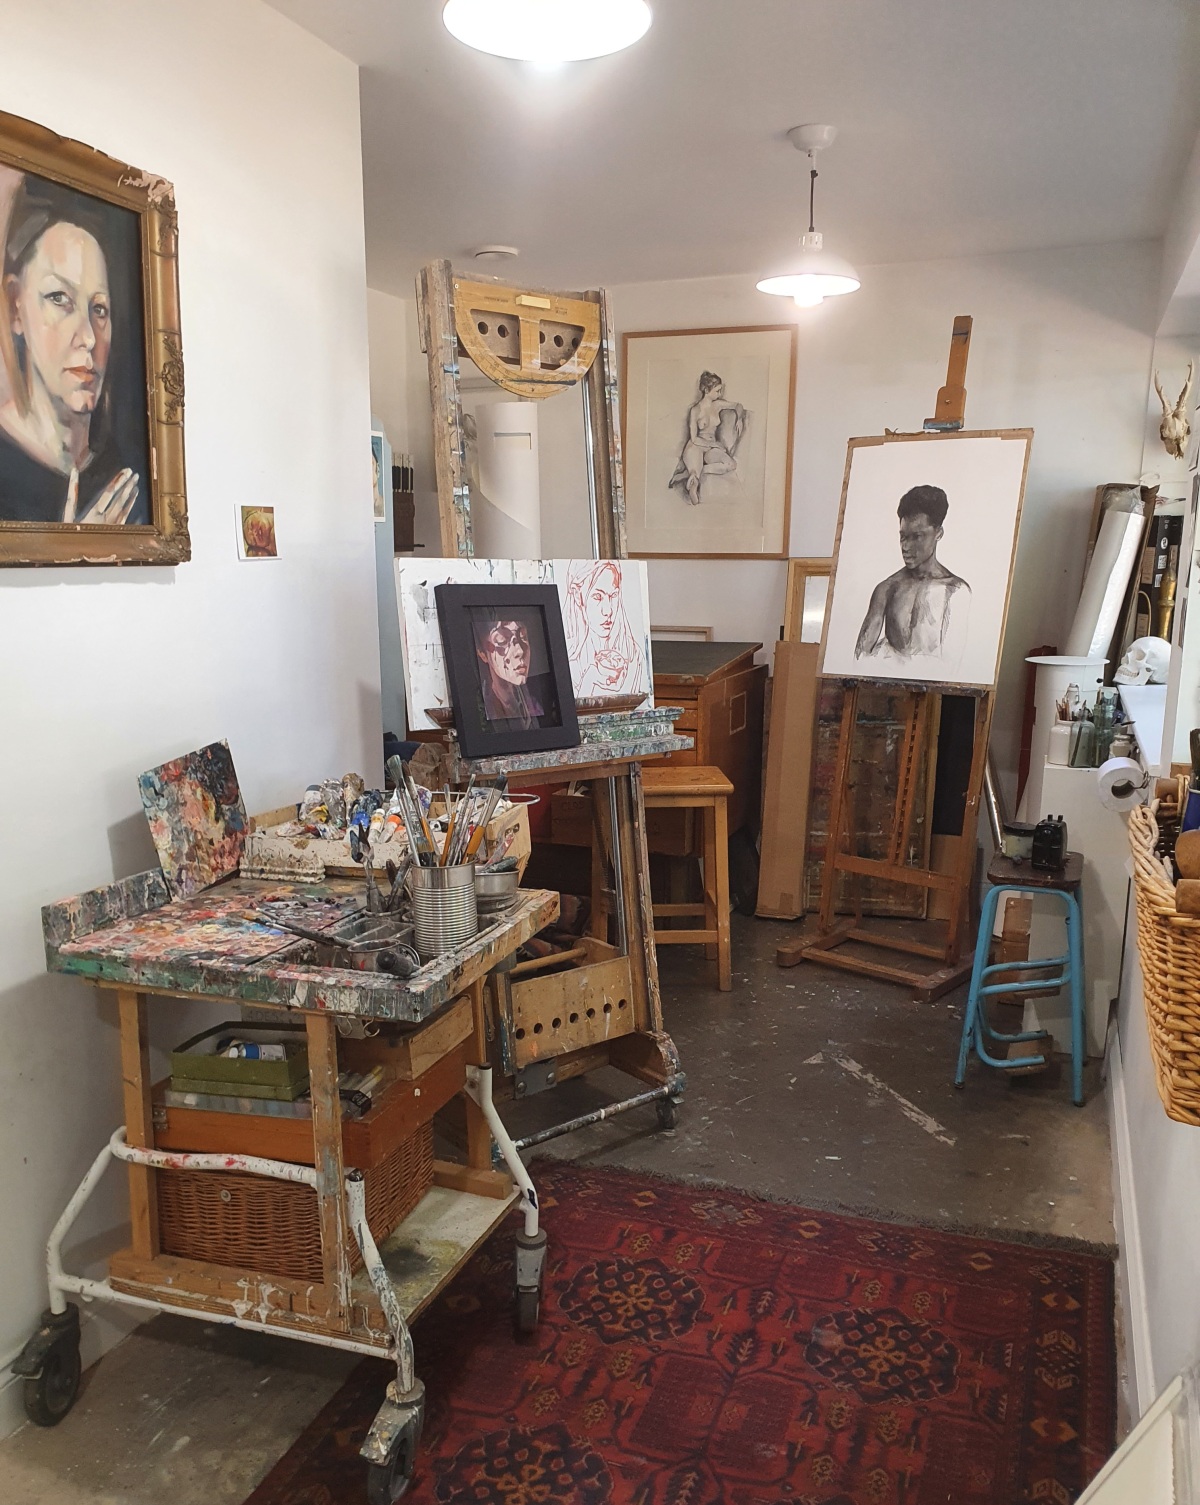 Open Studio Weekend 5th to 8th August 2022